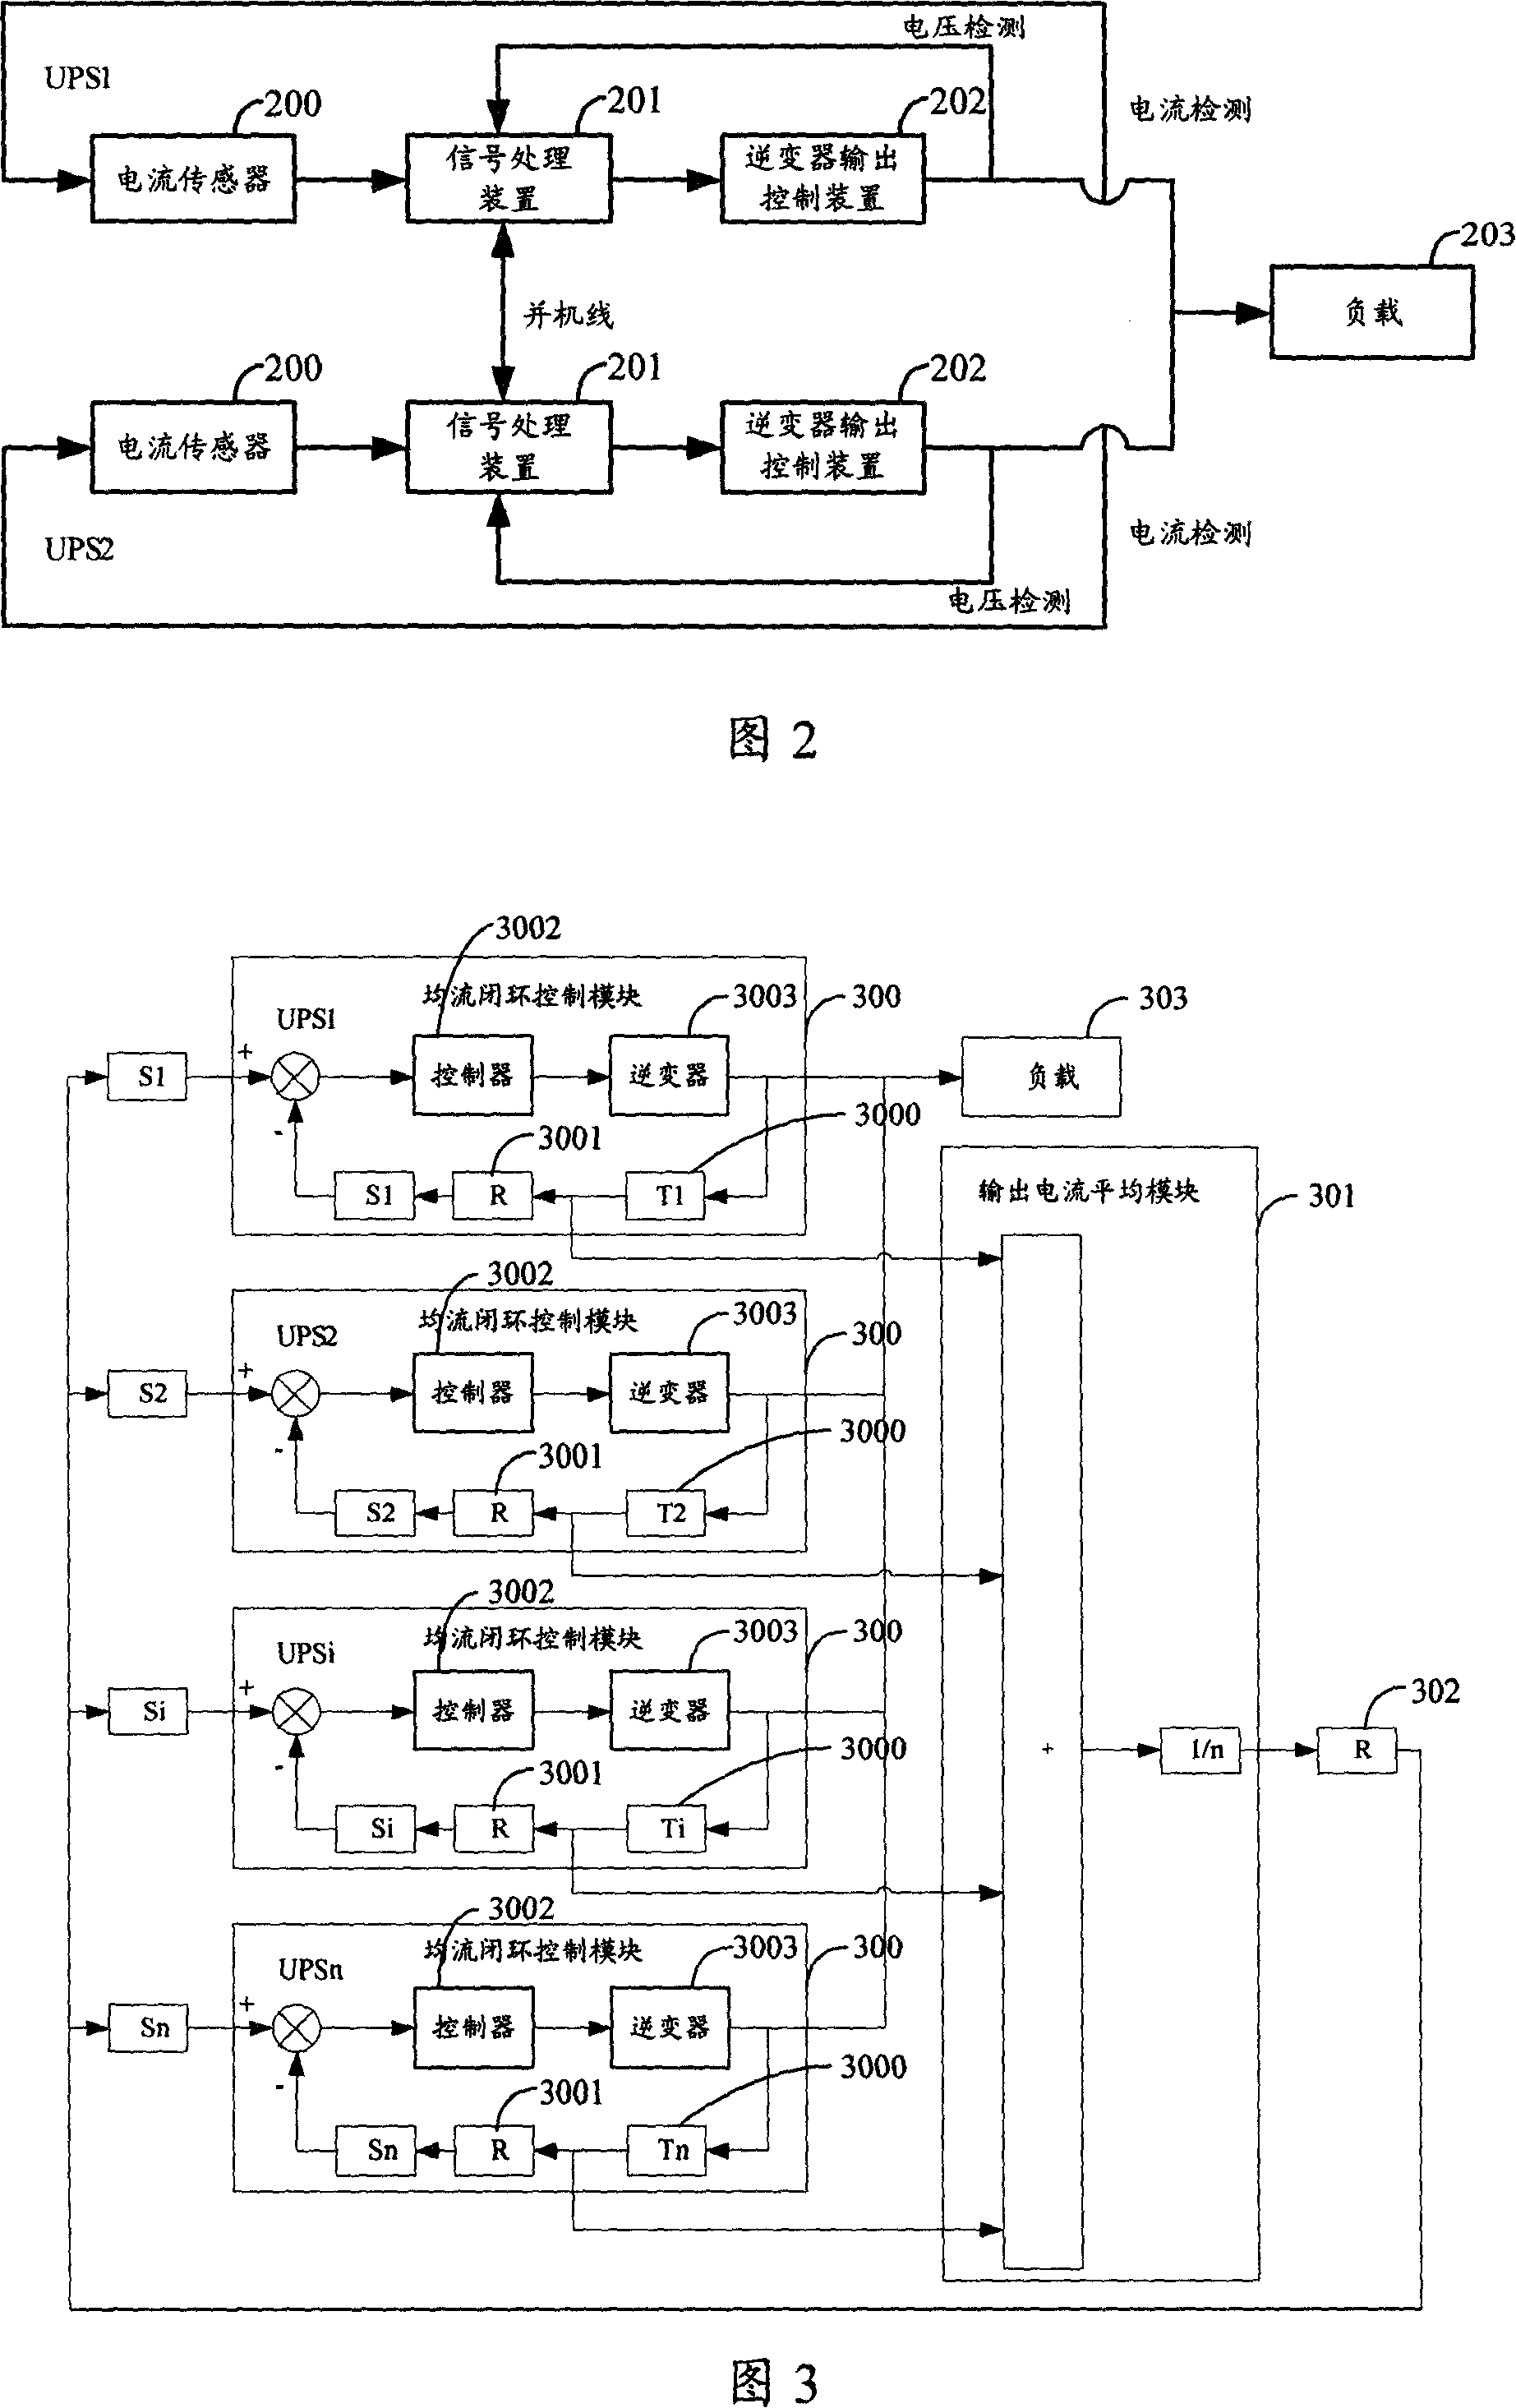 Method and system for parallel connection of UPS with different capacitance grade